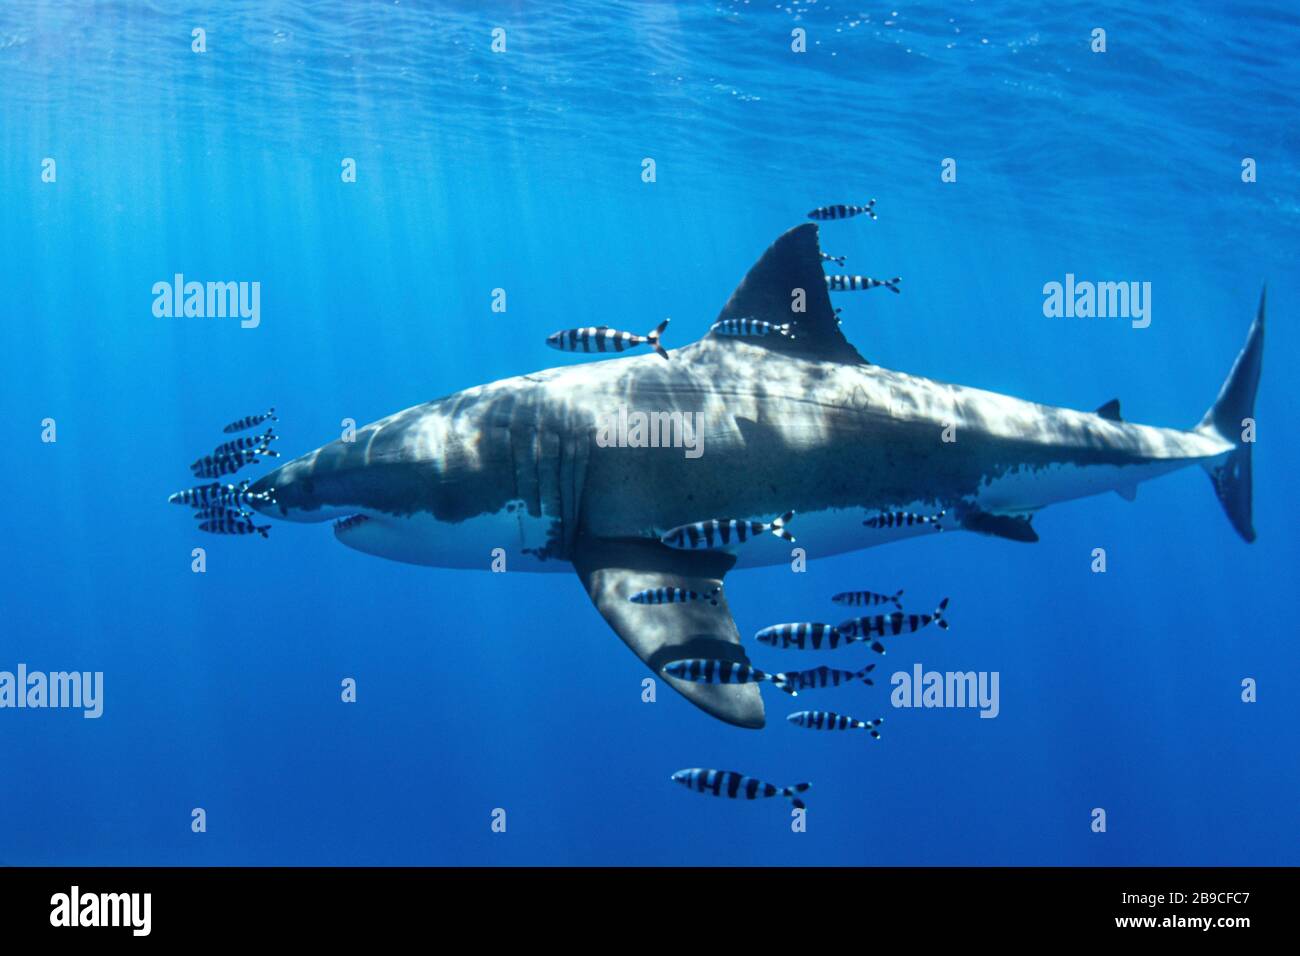 A great white shark is accompanied by scores of pilot fish. Stock Photo